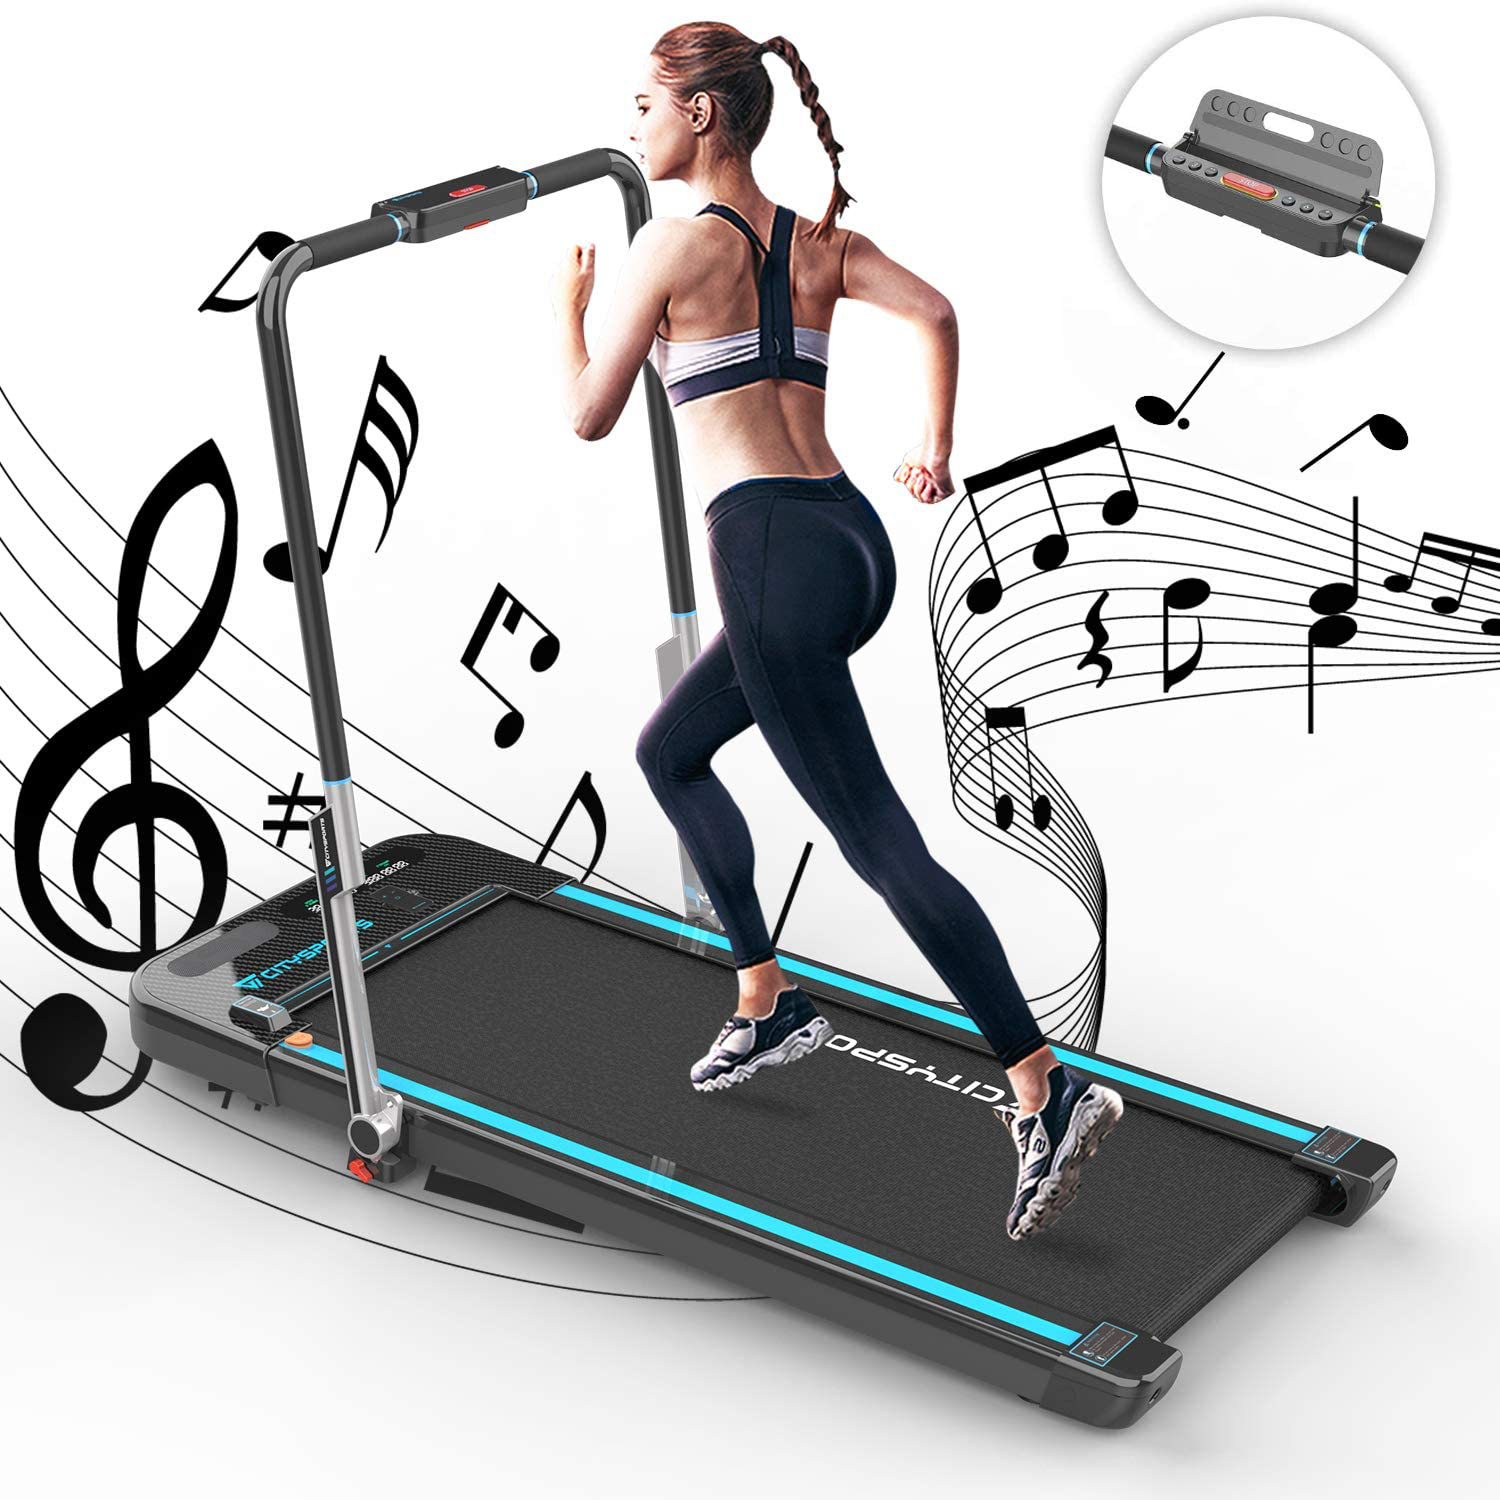 CITYSPORTS Treadmill for Home,Under Desk Treadmill Portable Walking Pad,Bluetooth Built-In Speakers, Adjustable Speed, LCD Screen & Calorie Counter, Ultra Thin and Silent, Intended for Home/Office Animals & Pet Supplies > Pet Supplies > Dog Supplies > Dog Treadmills CITYSPORTS WP3-1  